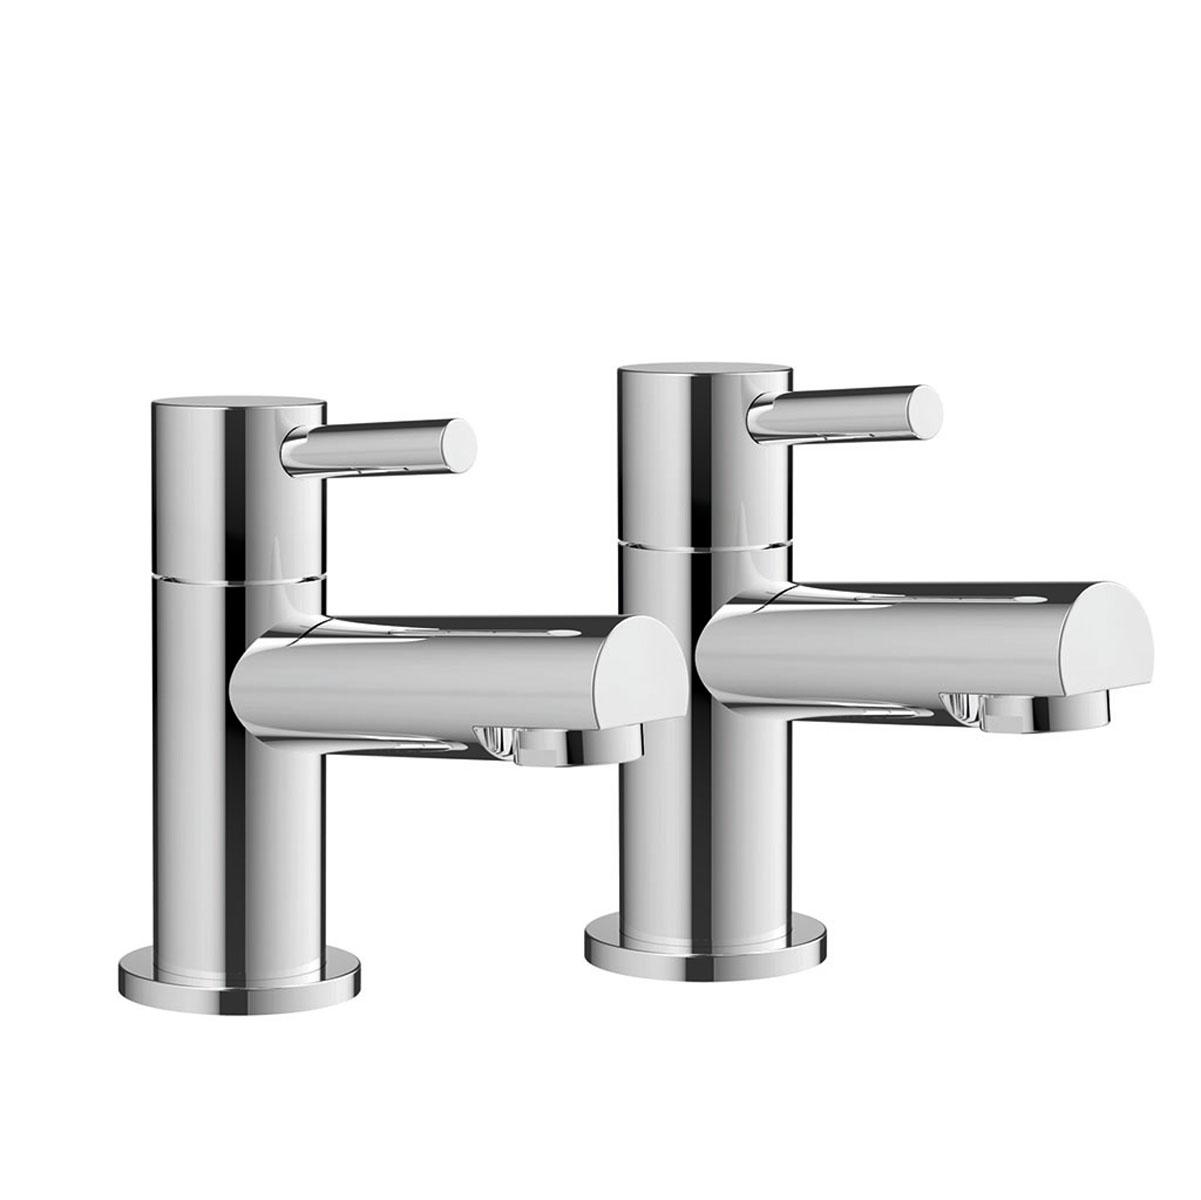 An image of Zico Pair Of Bath Taps No Waste - Chrome